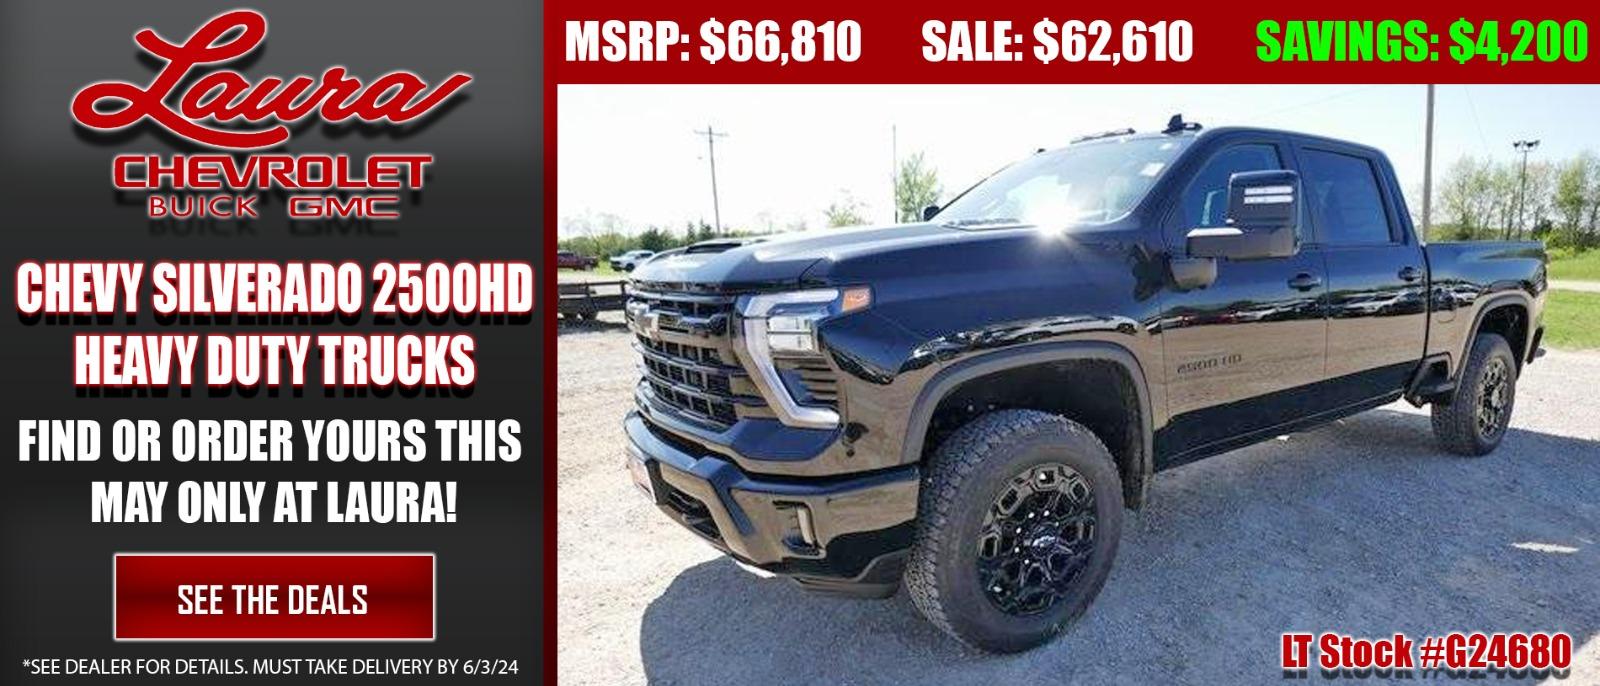 Find your new Silverado 2500 HD this month at Laura Chevrolet Buick GMC!